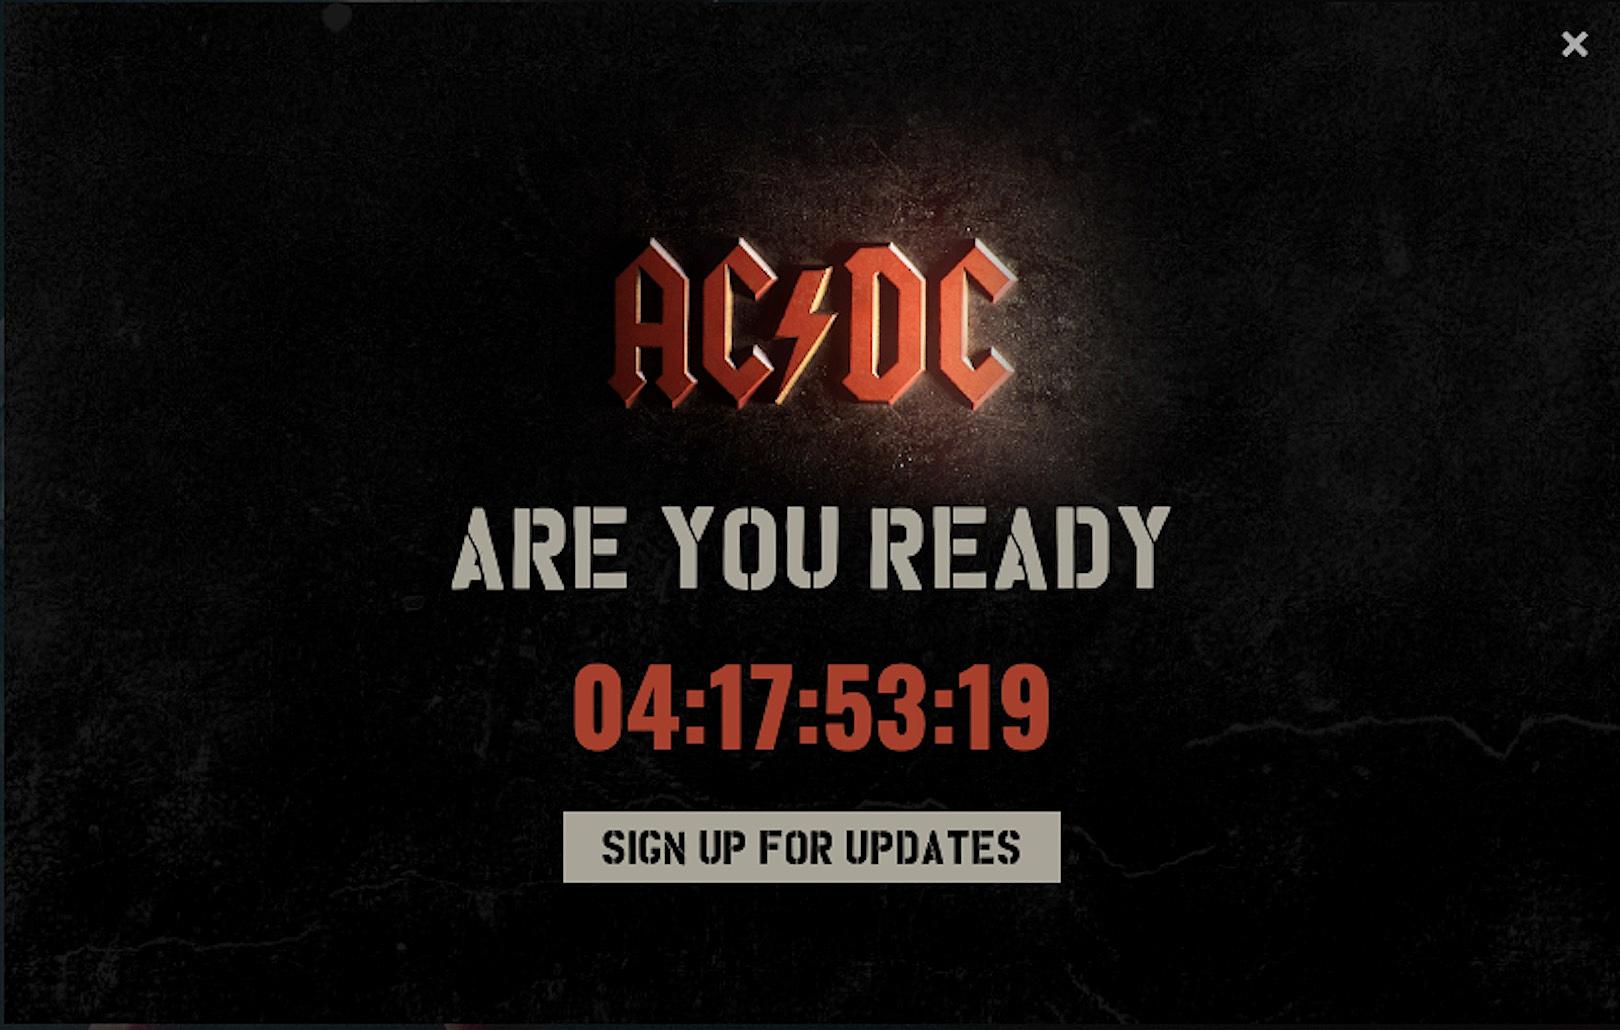 AC/DC Launch Mysterious Countdown Tease - Are You Ready?